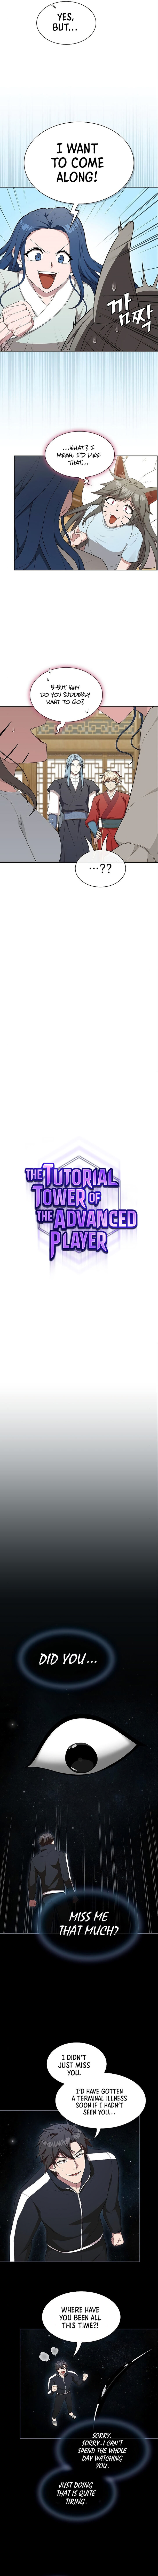 the_tutorial_tower_of_the_advanced_player_164_2